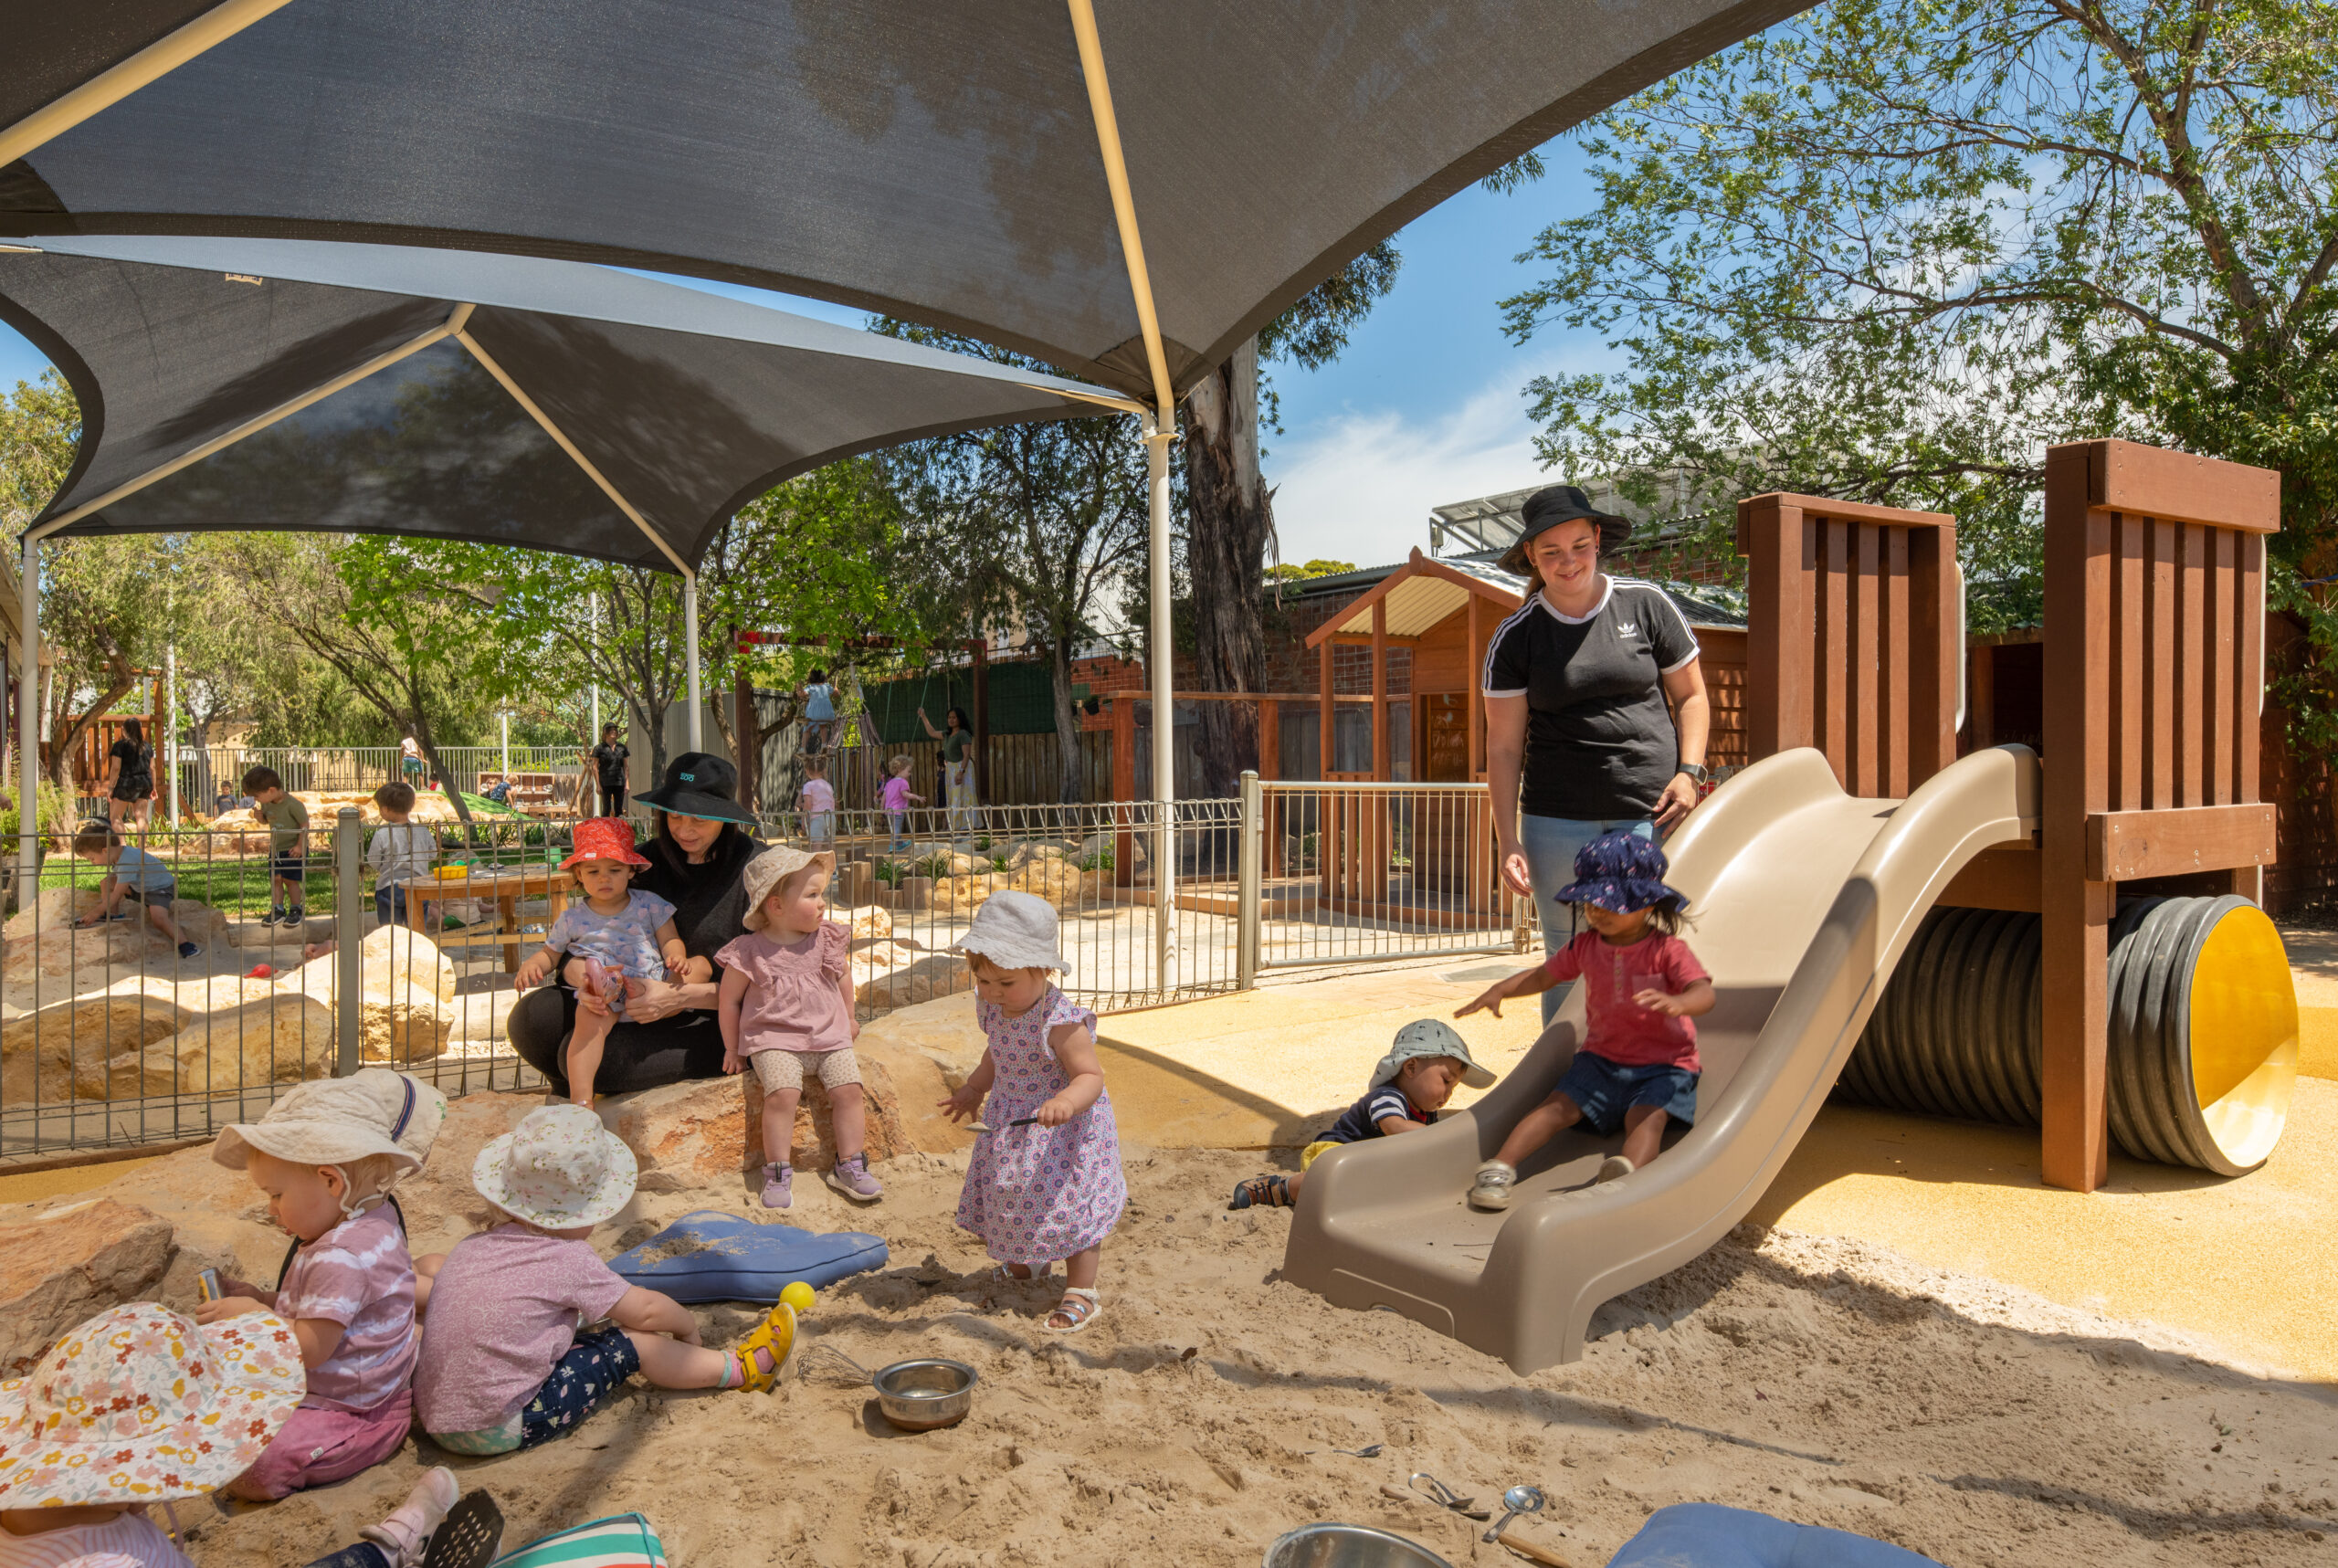 Dedicated babies outdoor play yard and sandpit at St Morris Community Child Care Centre